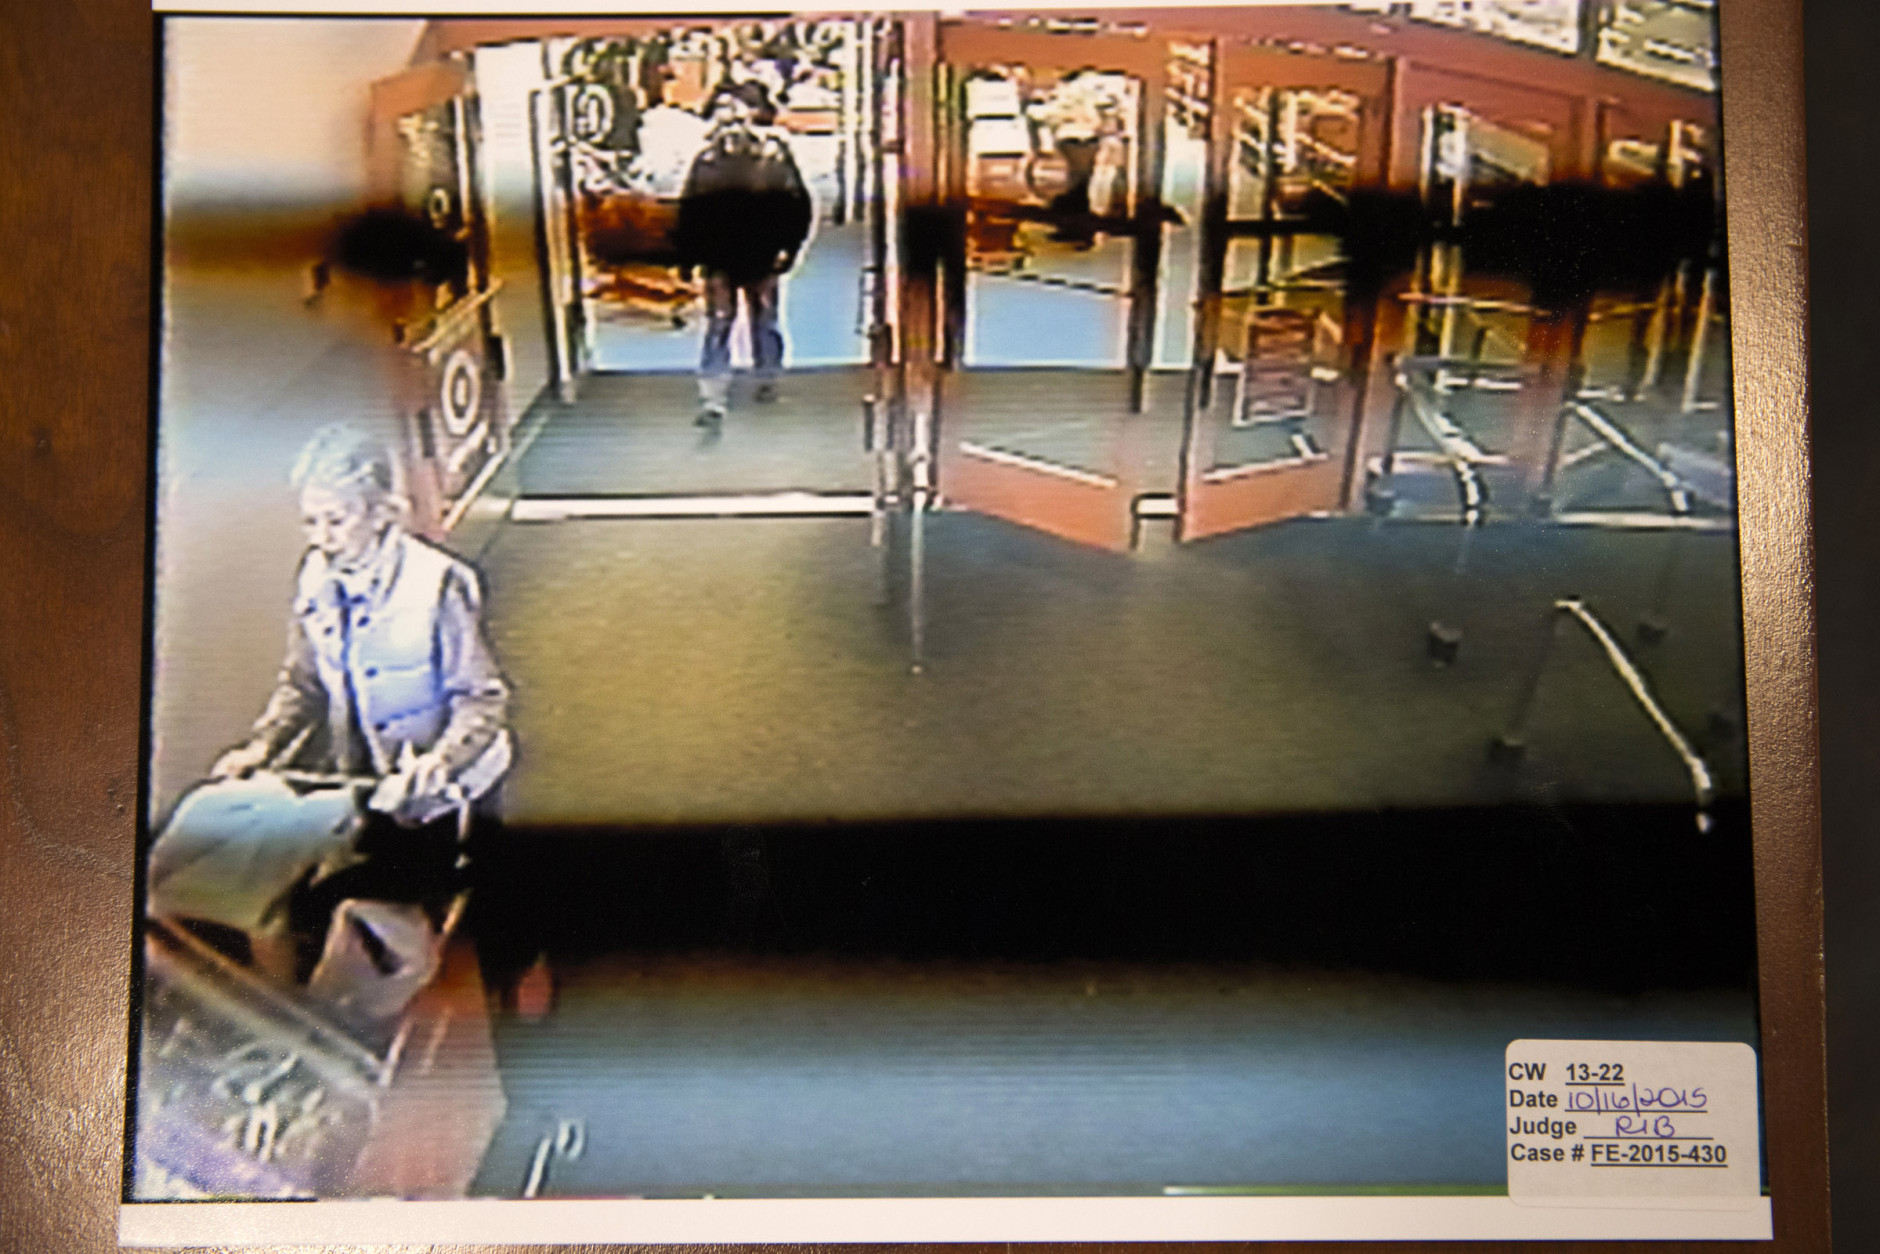 A freeze frame from a surveillance video of Nancy Dunning, lower left, and a person of interest inside a Target store the day of Dunning's murder is photographed during the Charles Severance murder trial at the Fairfax County Circuit Court in Fairfax, Va., Friday, Oct. 16, 2015.  Severance is accused of three murders over the course of a decade in Alexandria, Va. (AP Photo/Evan Vucci, Pool)